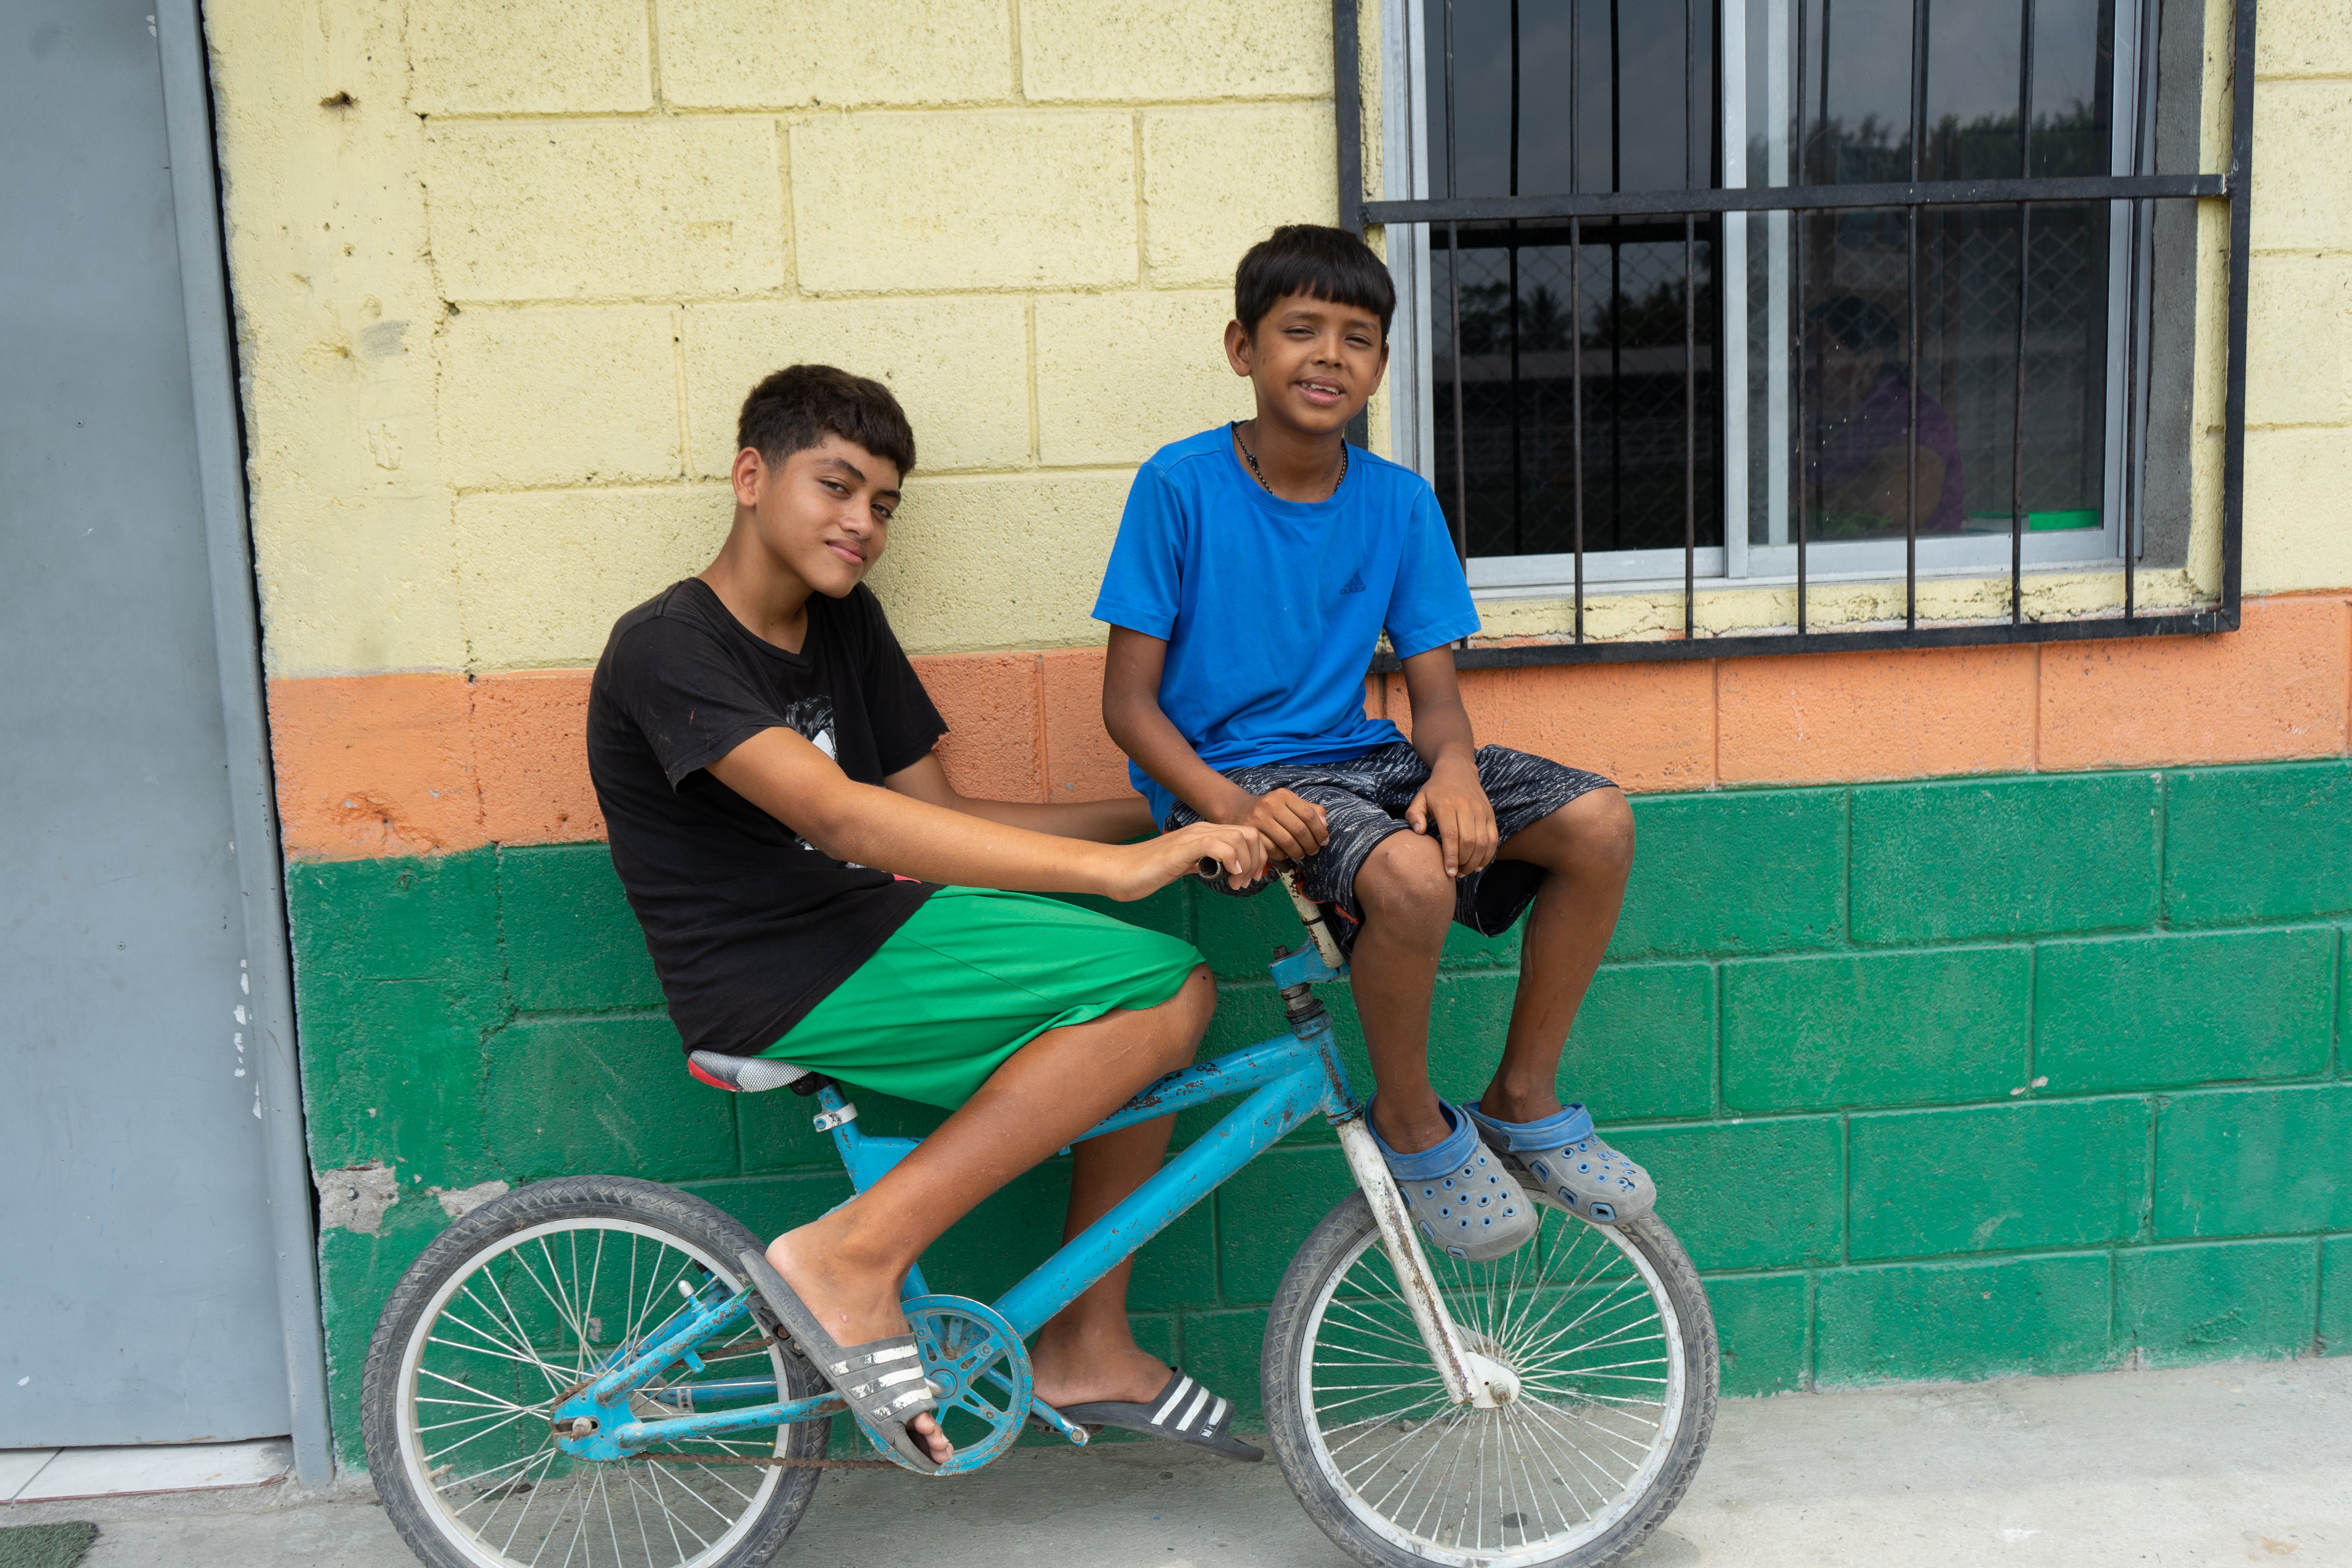 In Honduras, a young boy sits on his bike with his friend, Chulo sitting on the handle bars. A colorful wall in behind them. 